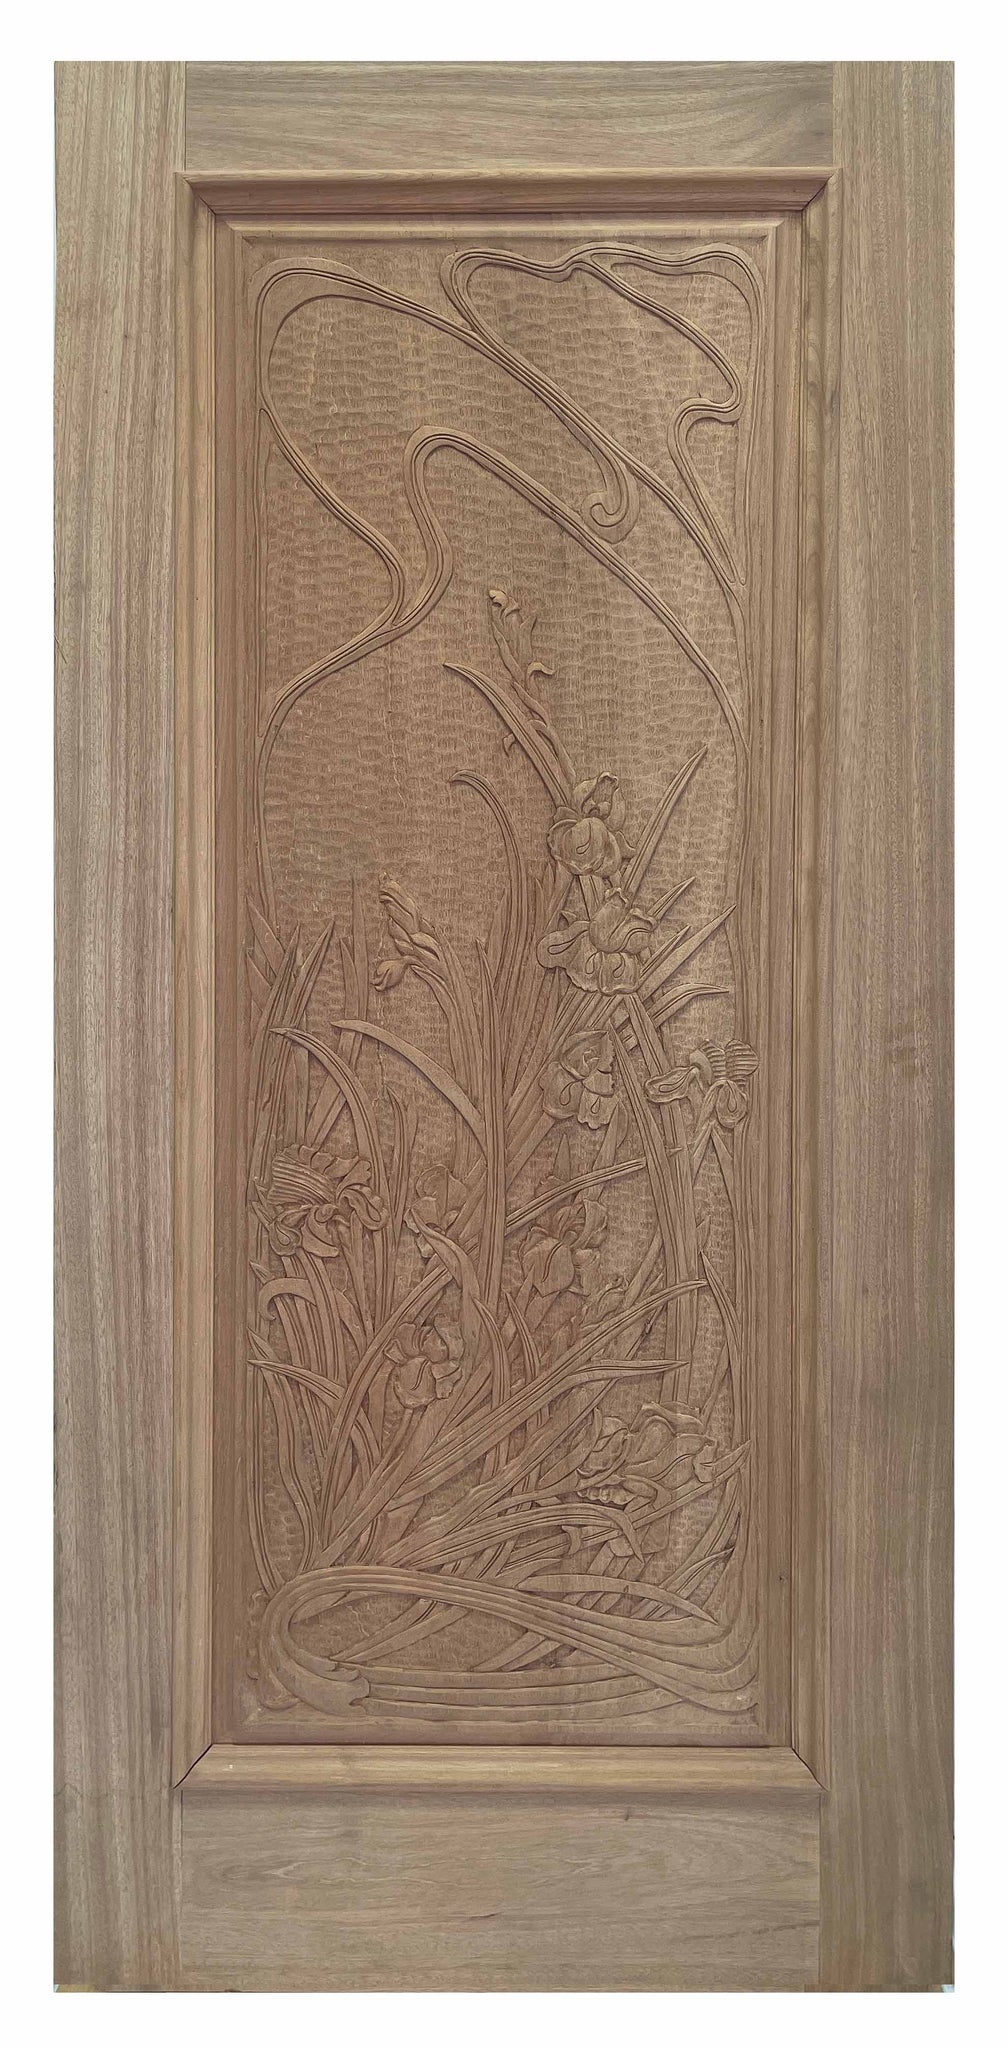 3 ft. x 6 ft. 8 in. Unfinished Mahogany Wood Exterior Door with Decorative Carvings